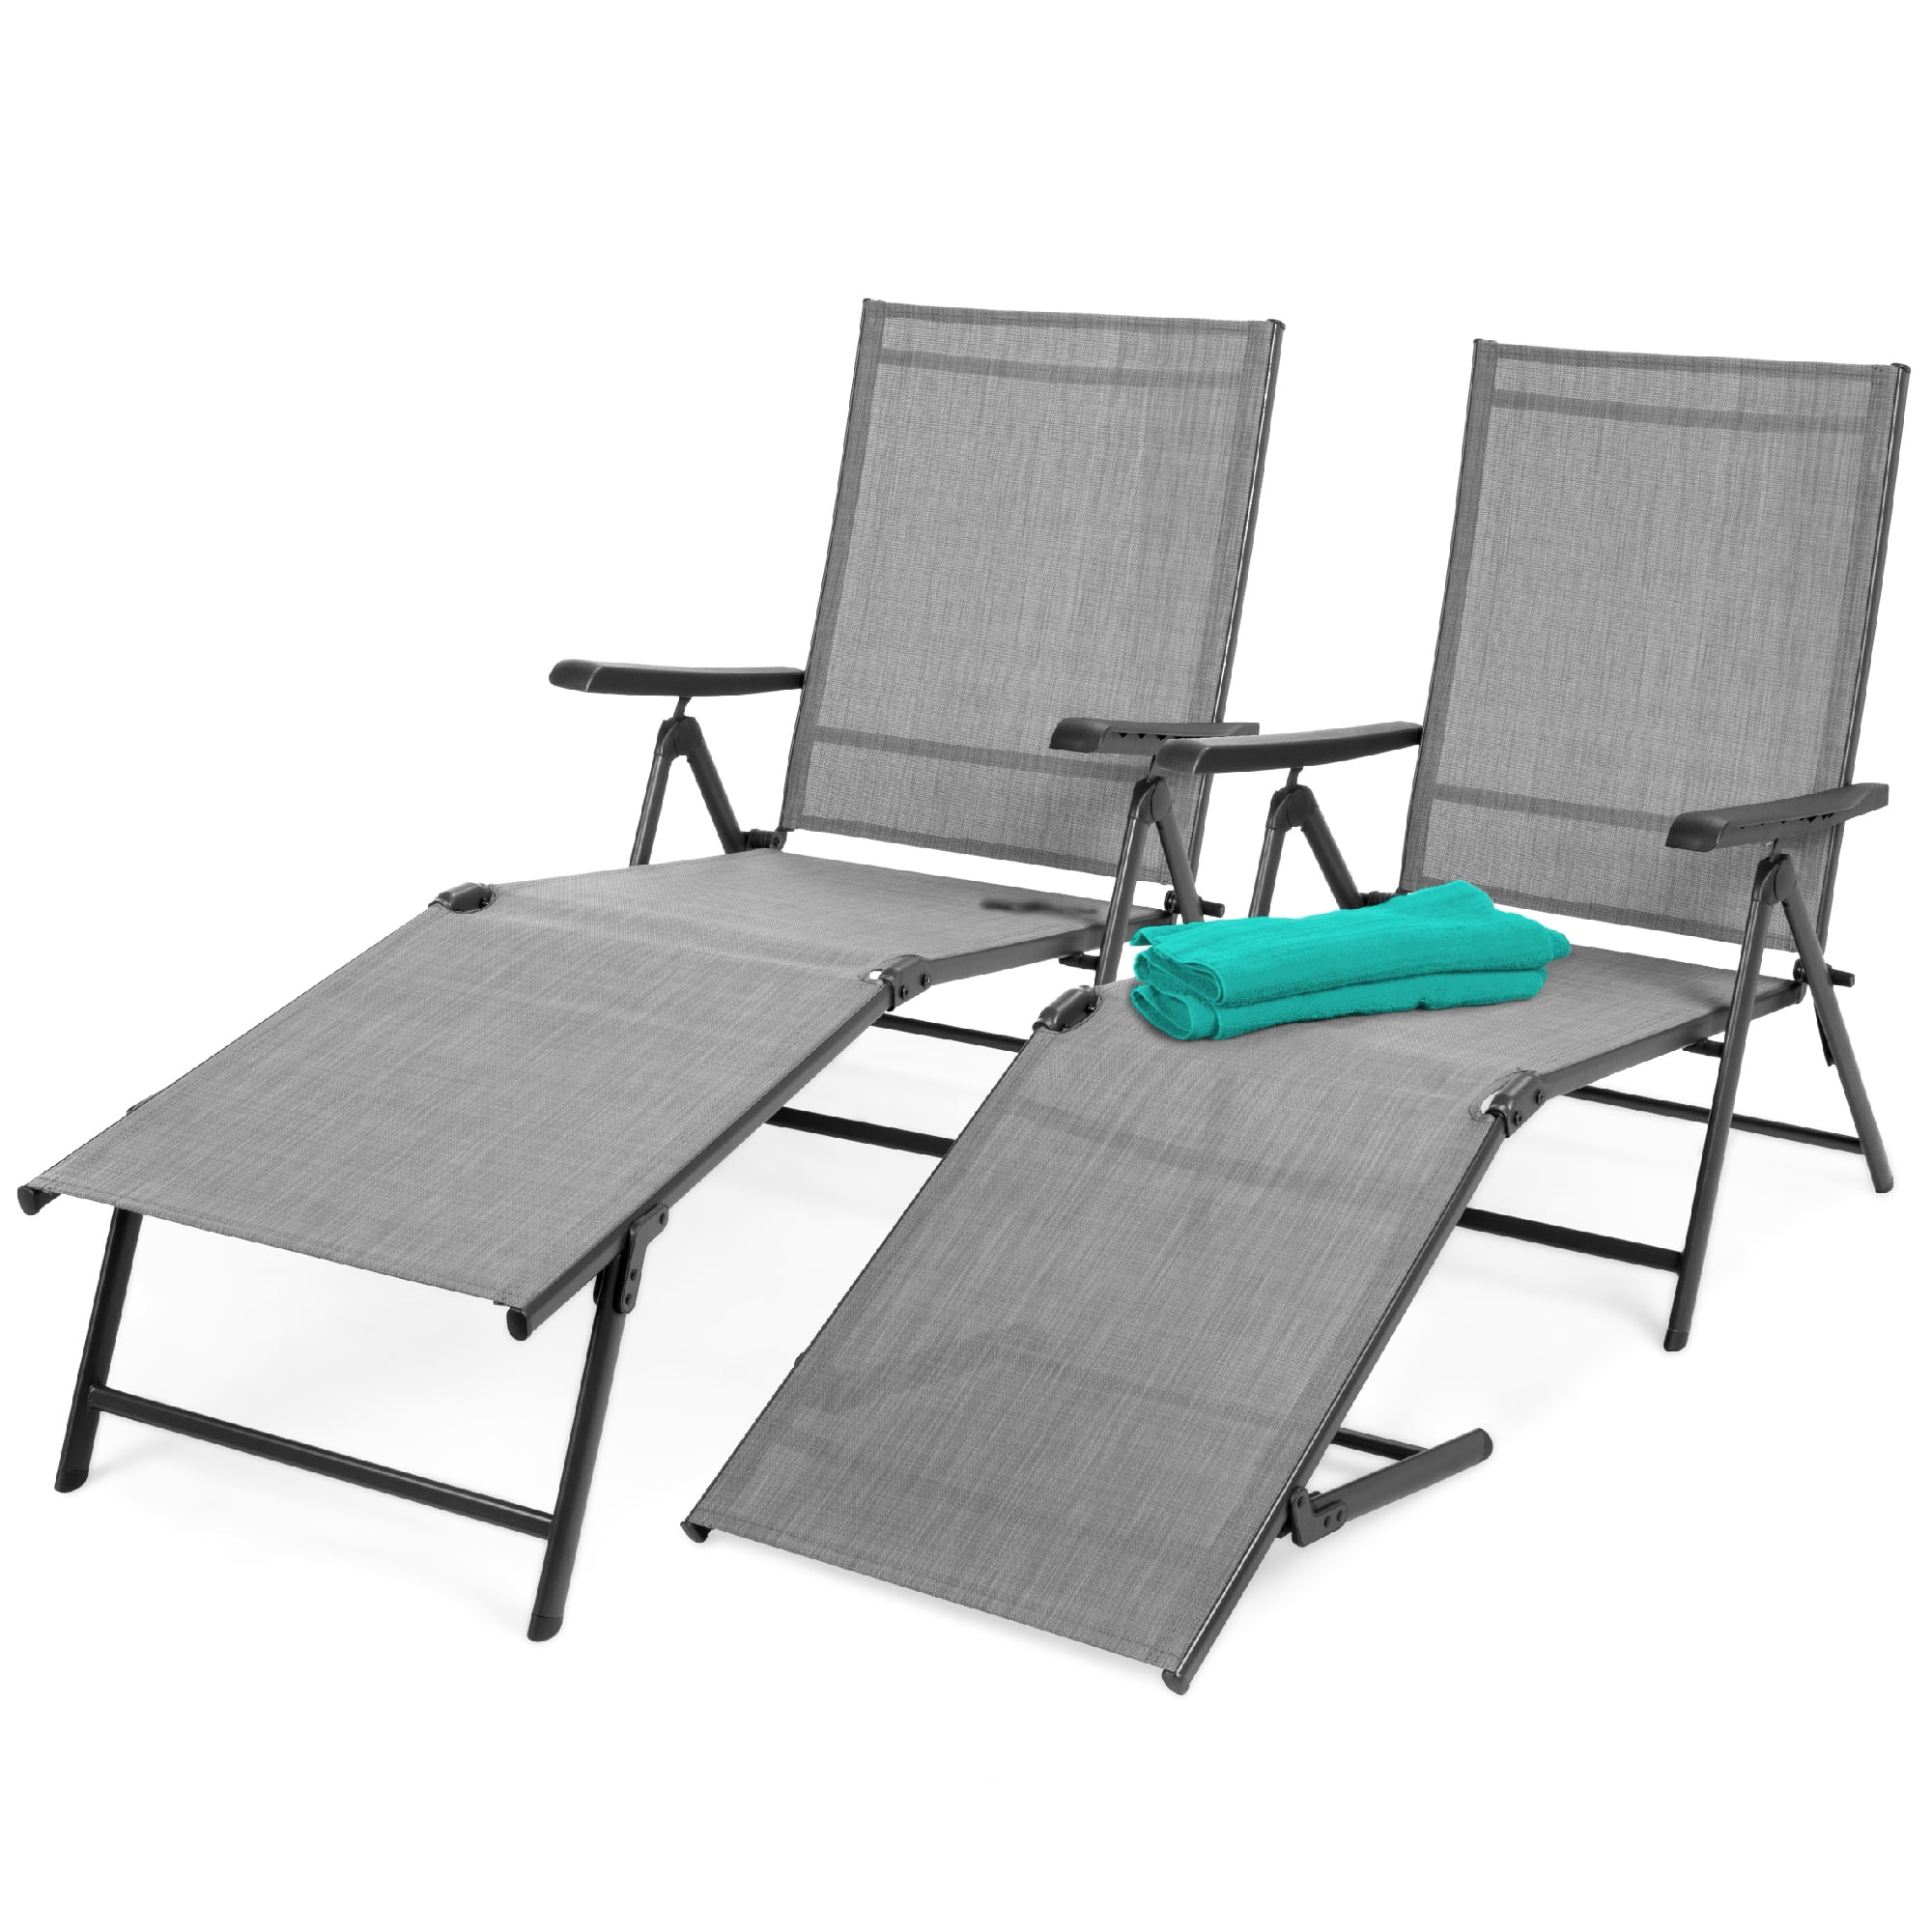 Best Choice Products Set of 2 Outdoor Patio Chaise Lounge Chair Adjustable Folding Pool Lounger w/ Steel Frame - Gray